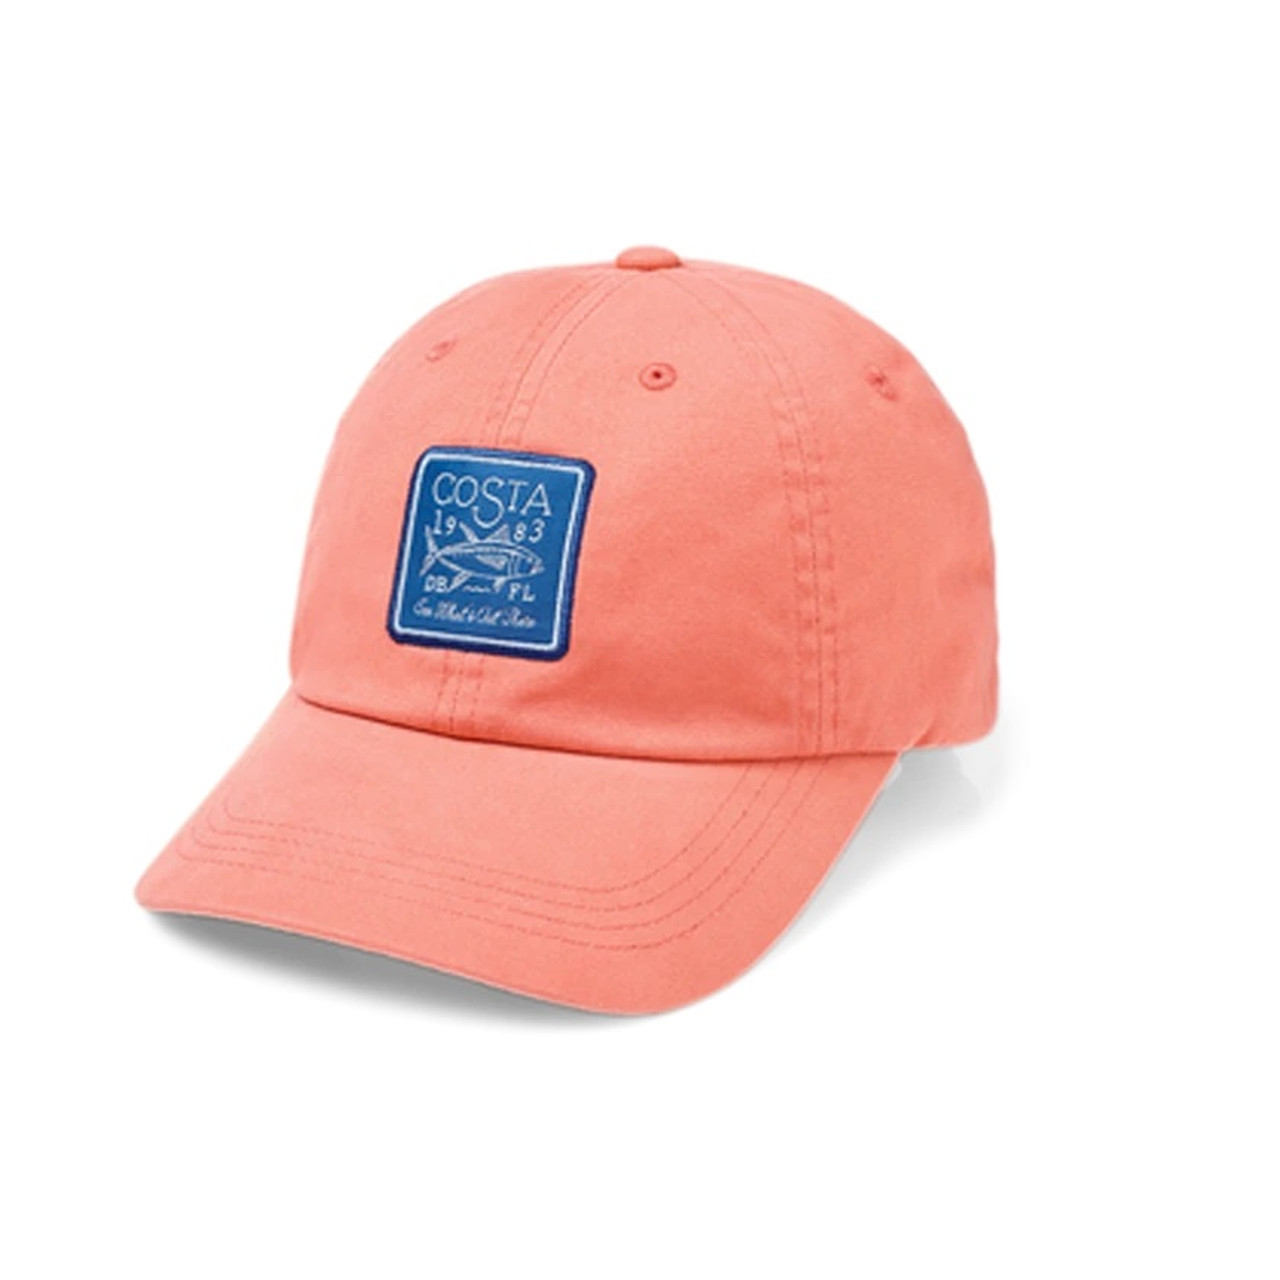 https://cdn11.bigcommerce.com/s-suohc1v4iw/images/stencil/1280x1280/products/24347/50746/Hats_Longboat_coral_2048x__29211.1607306625.jpg?c=2